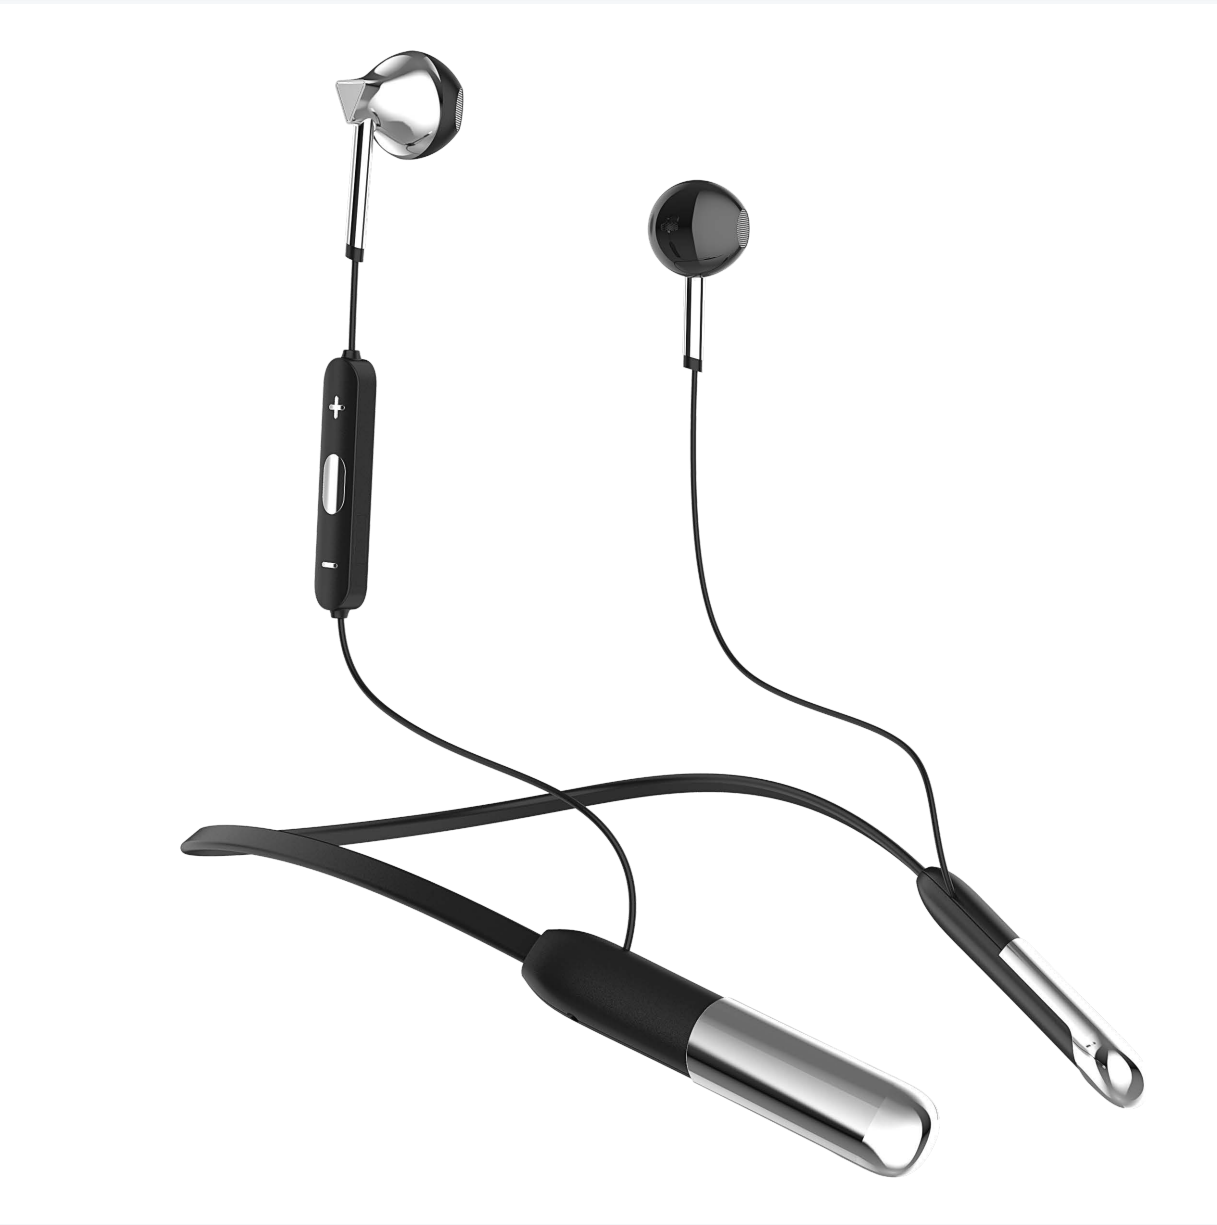 SBY M132 Stereo Wireless Headset  20hours,SBY M36 Bluetooth Neckband Headphones,Lightweight,SBY M32 Neckband Bluetooth Headphones 5.3, Fast Charging Running Headphones